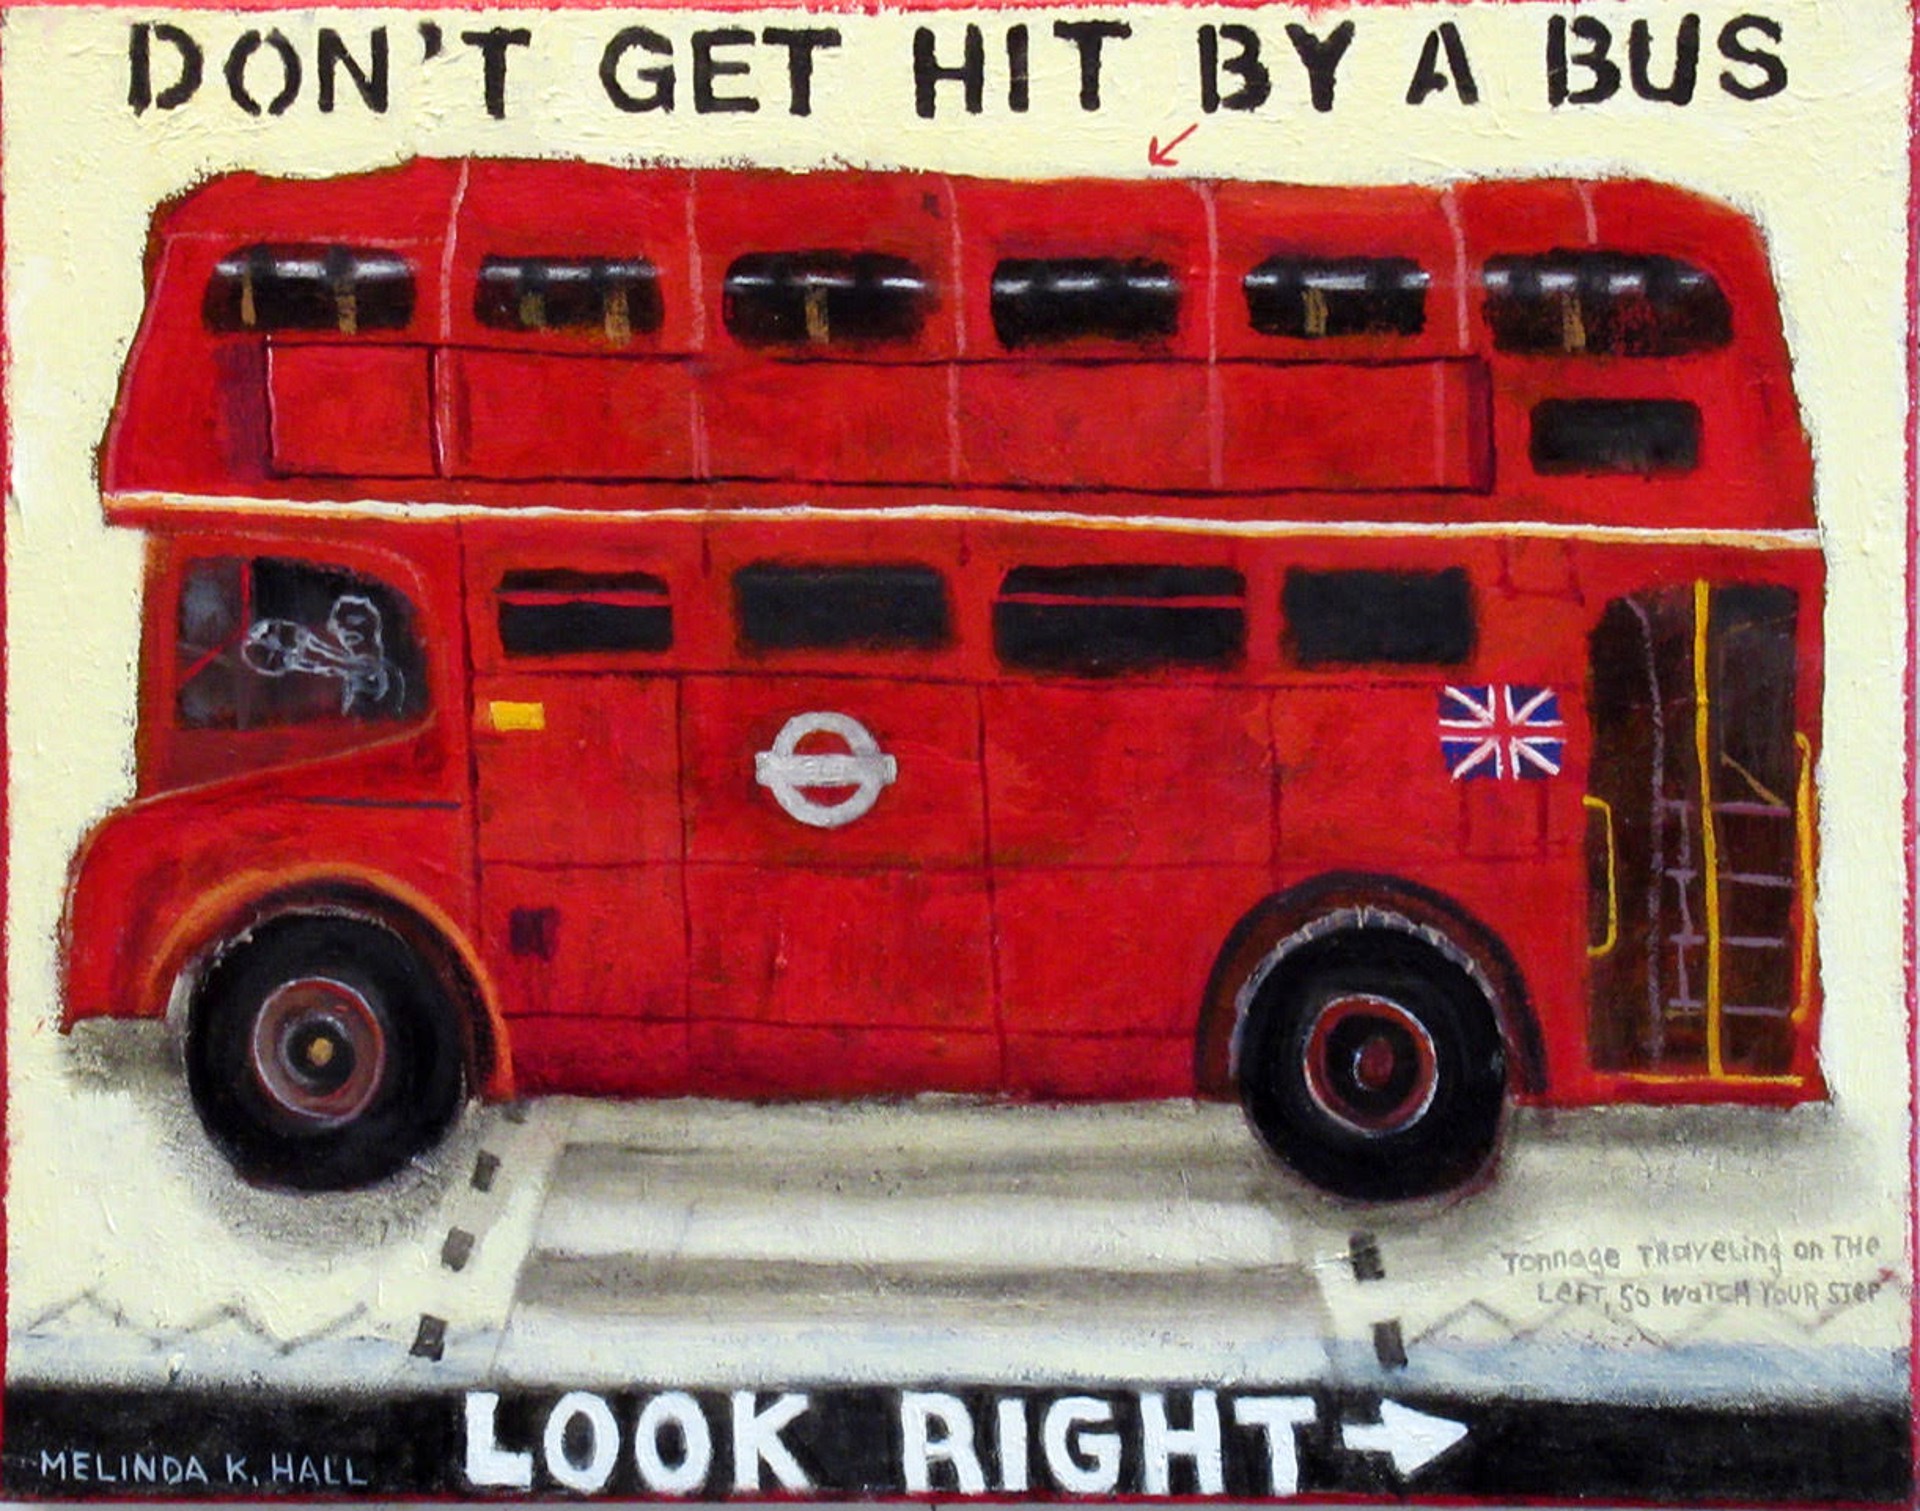 Don't Get Hit By a Bus by Melinda K. Hall